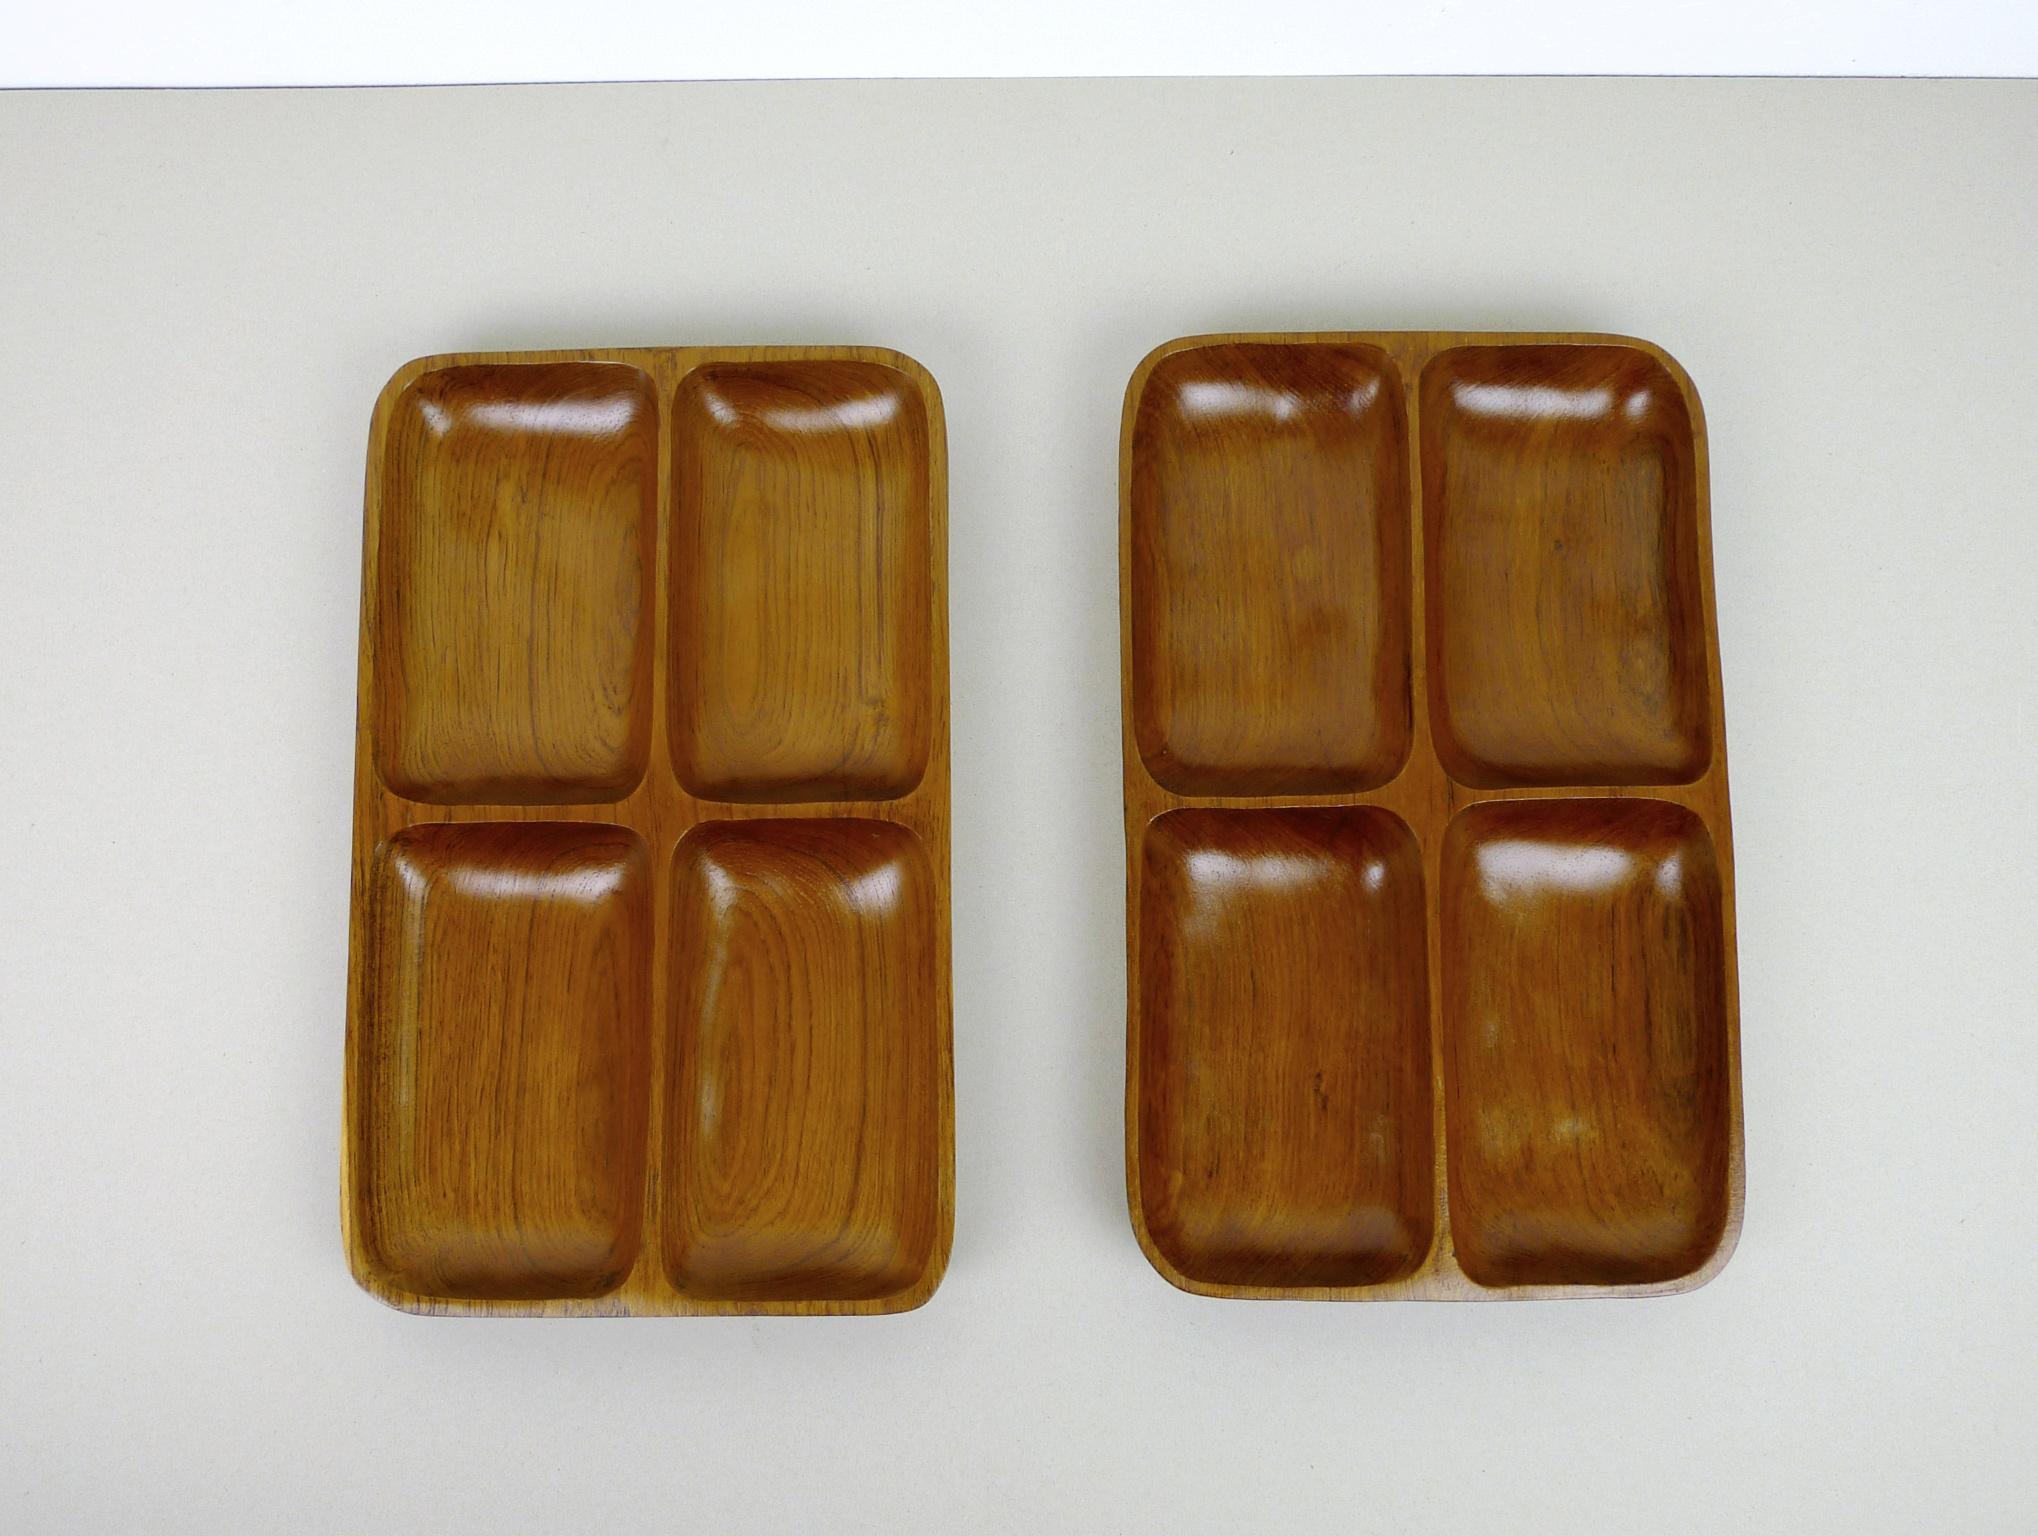 Scandinavian Modern Solid Teak Wood Bowl with Four Compartments, Denmark, 1960s For Sale